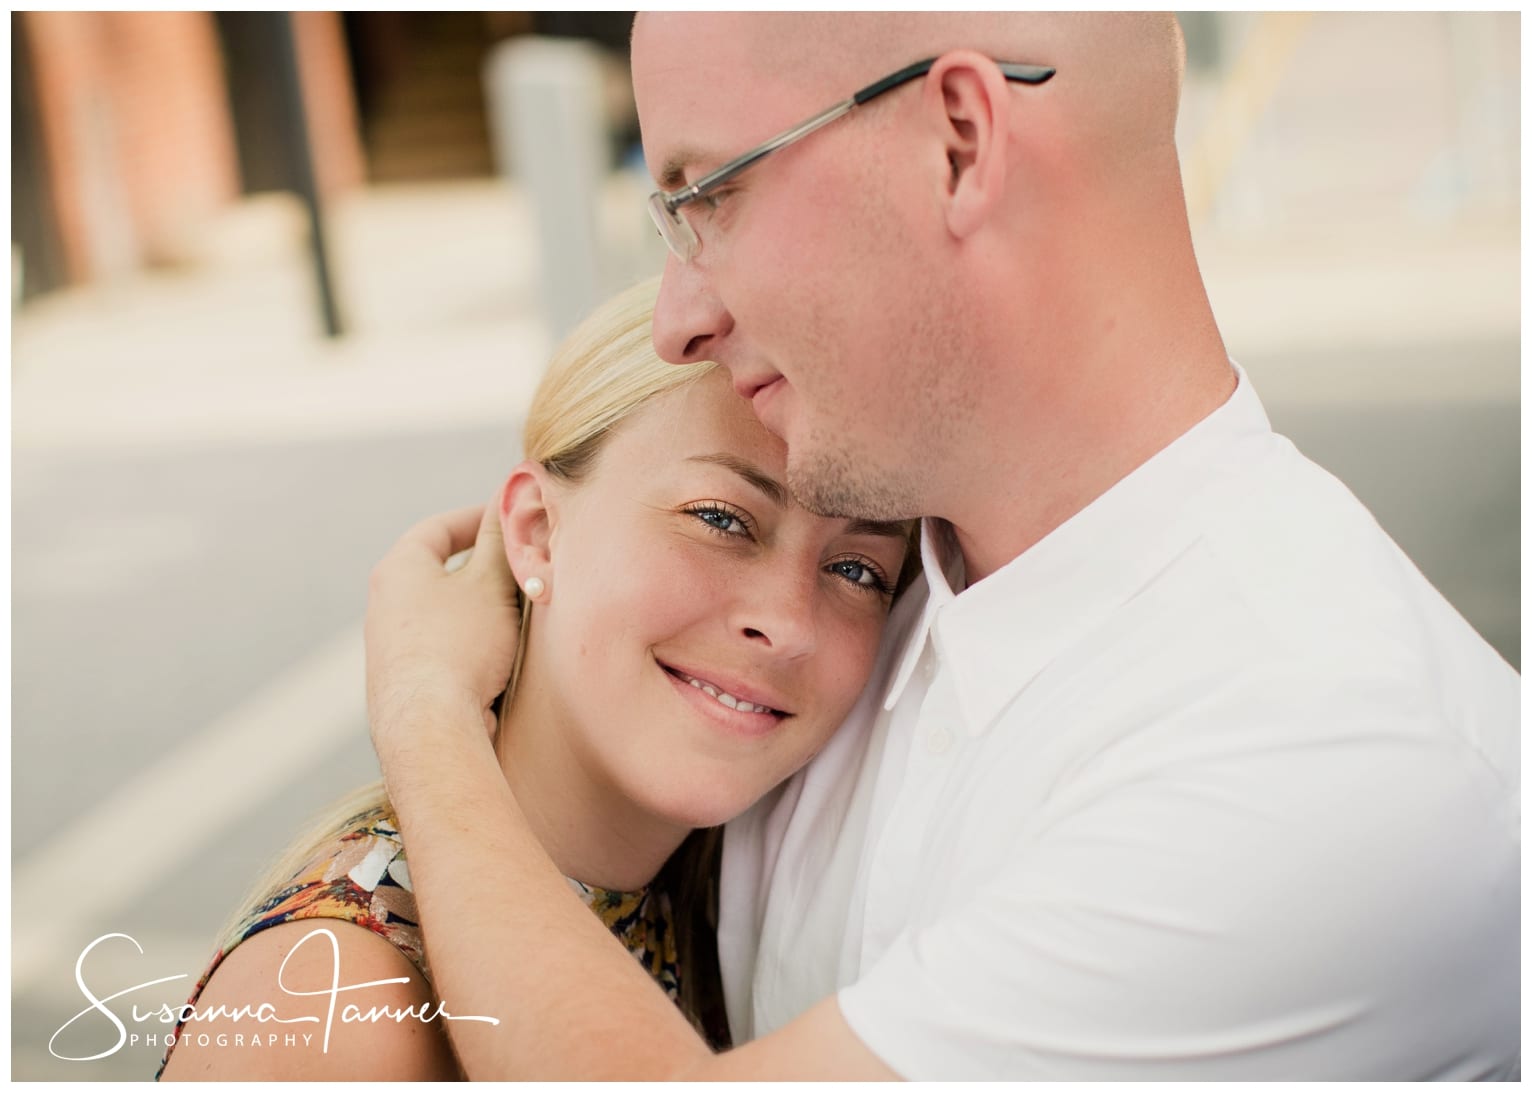 Fountain Square Indianapolis Photography Engagement Session male holding female close, her head on his chest and his arm around her